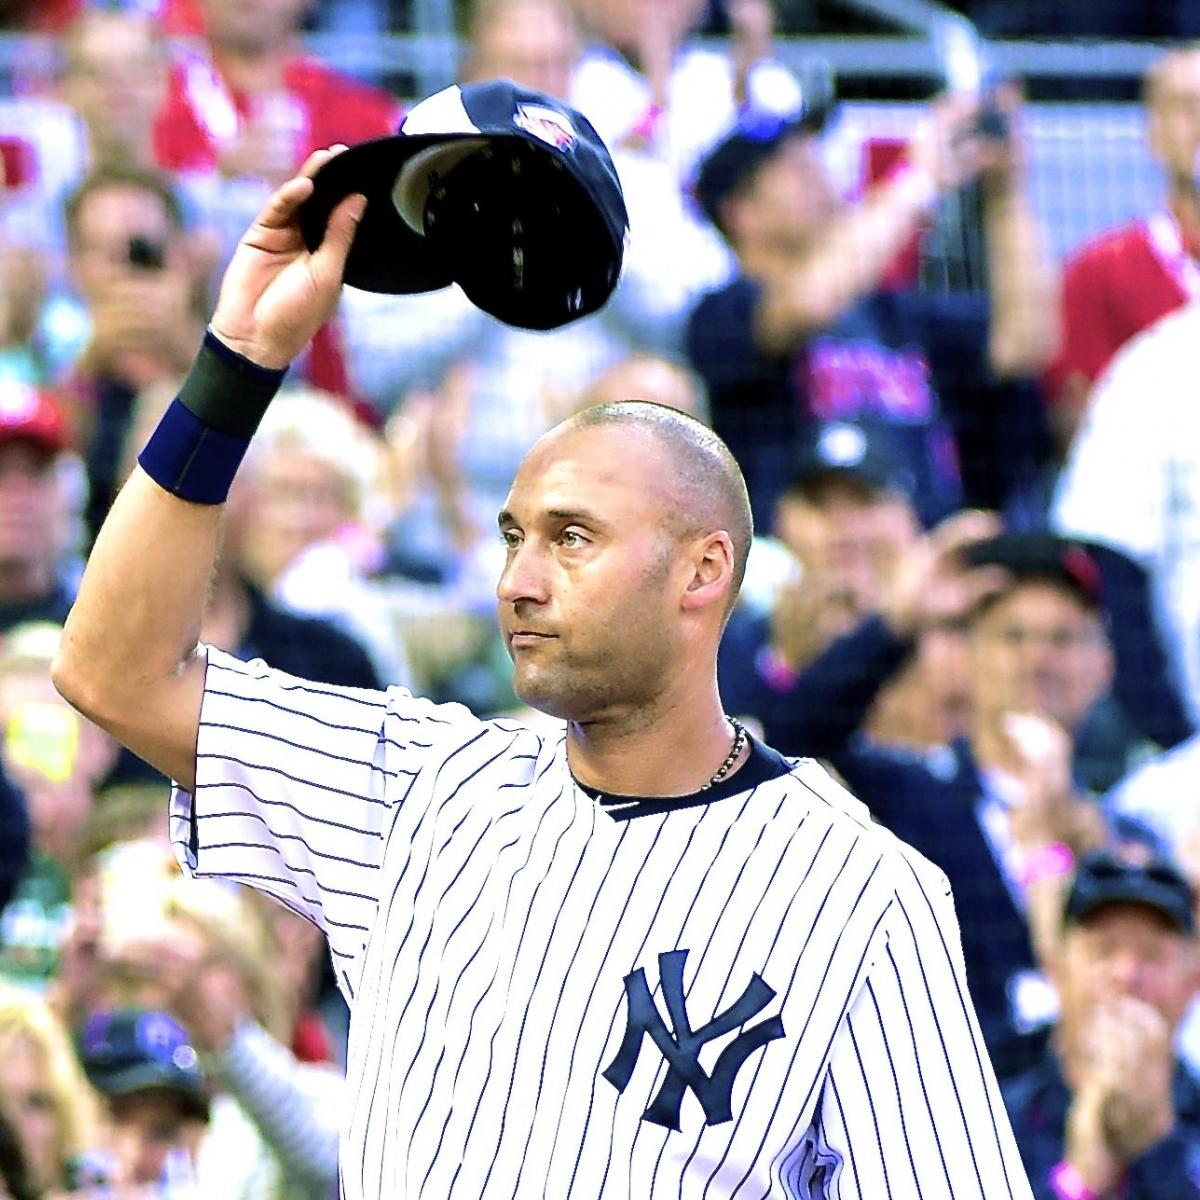 M.L.B. All-Star Game 2014: Derek Jeter Nabs 2 Hits in A.L. Victory